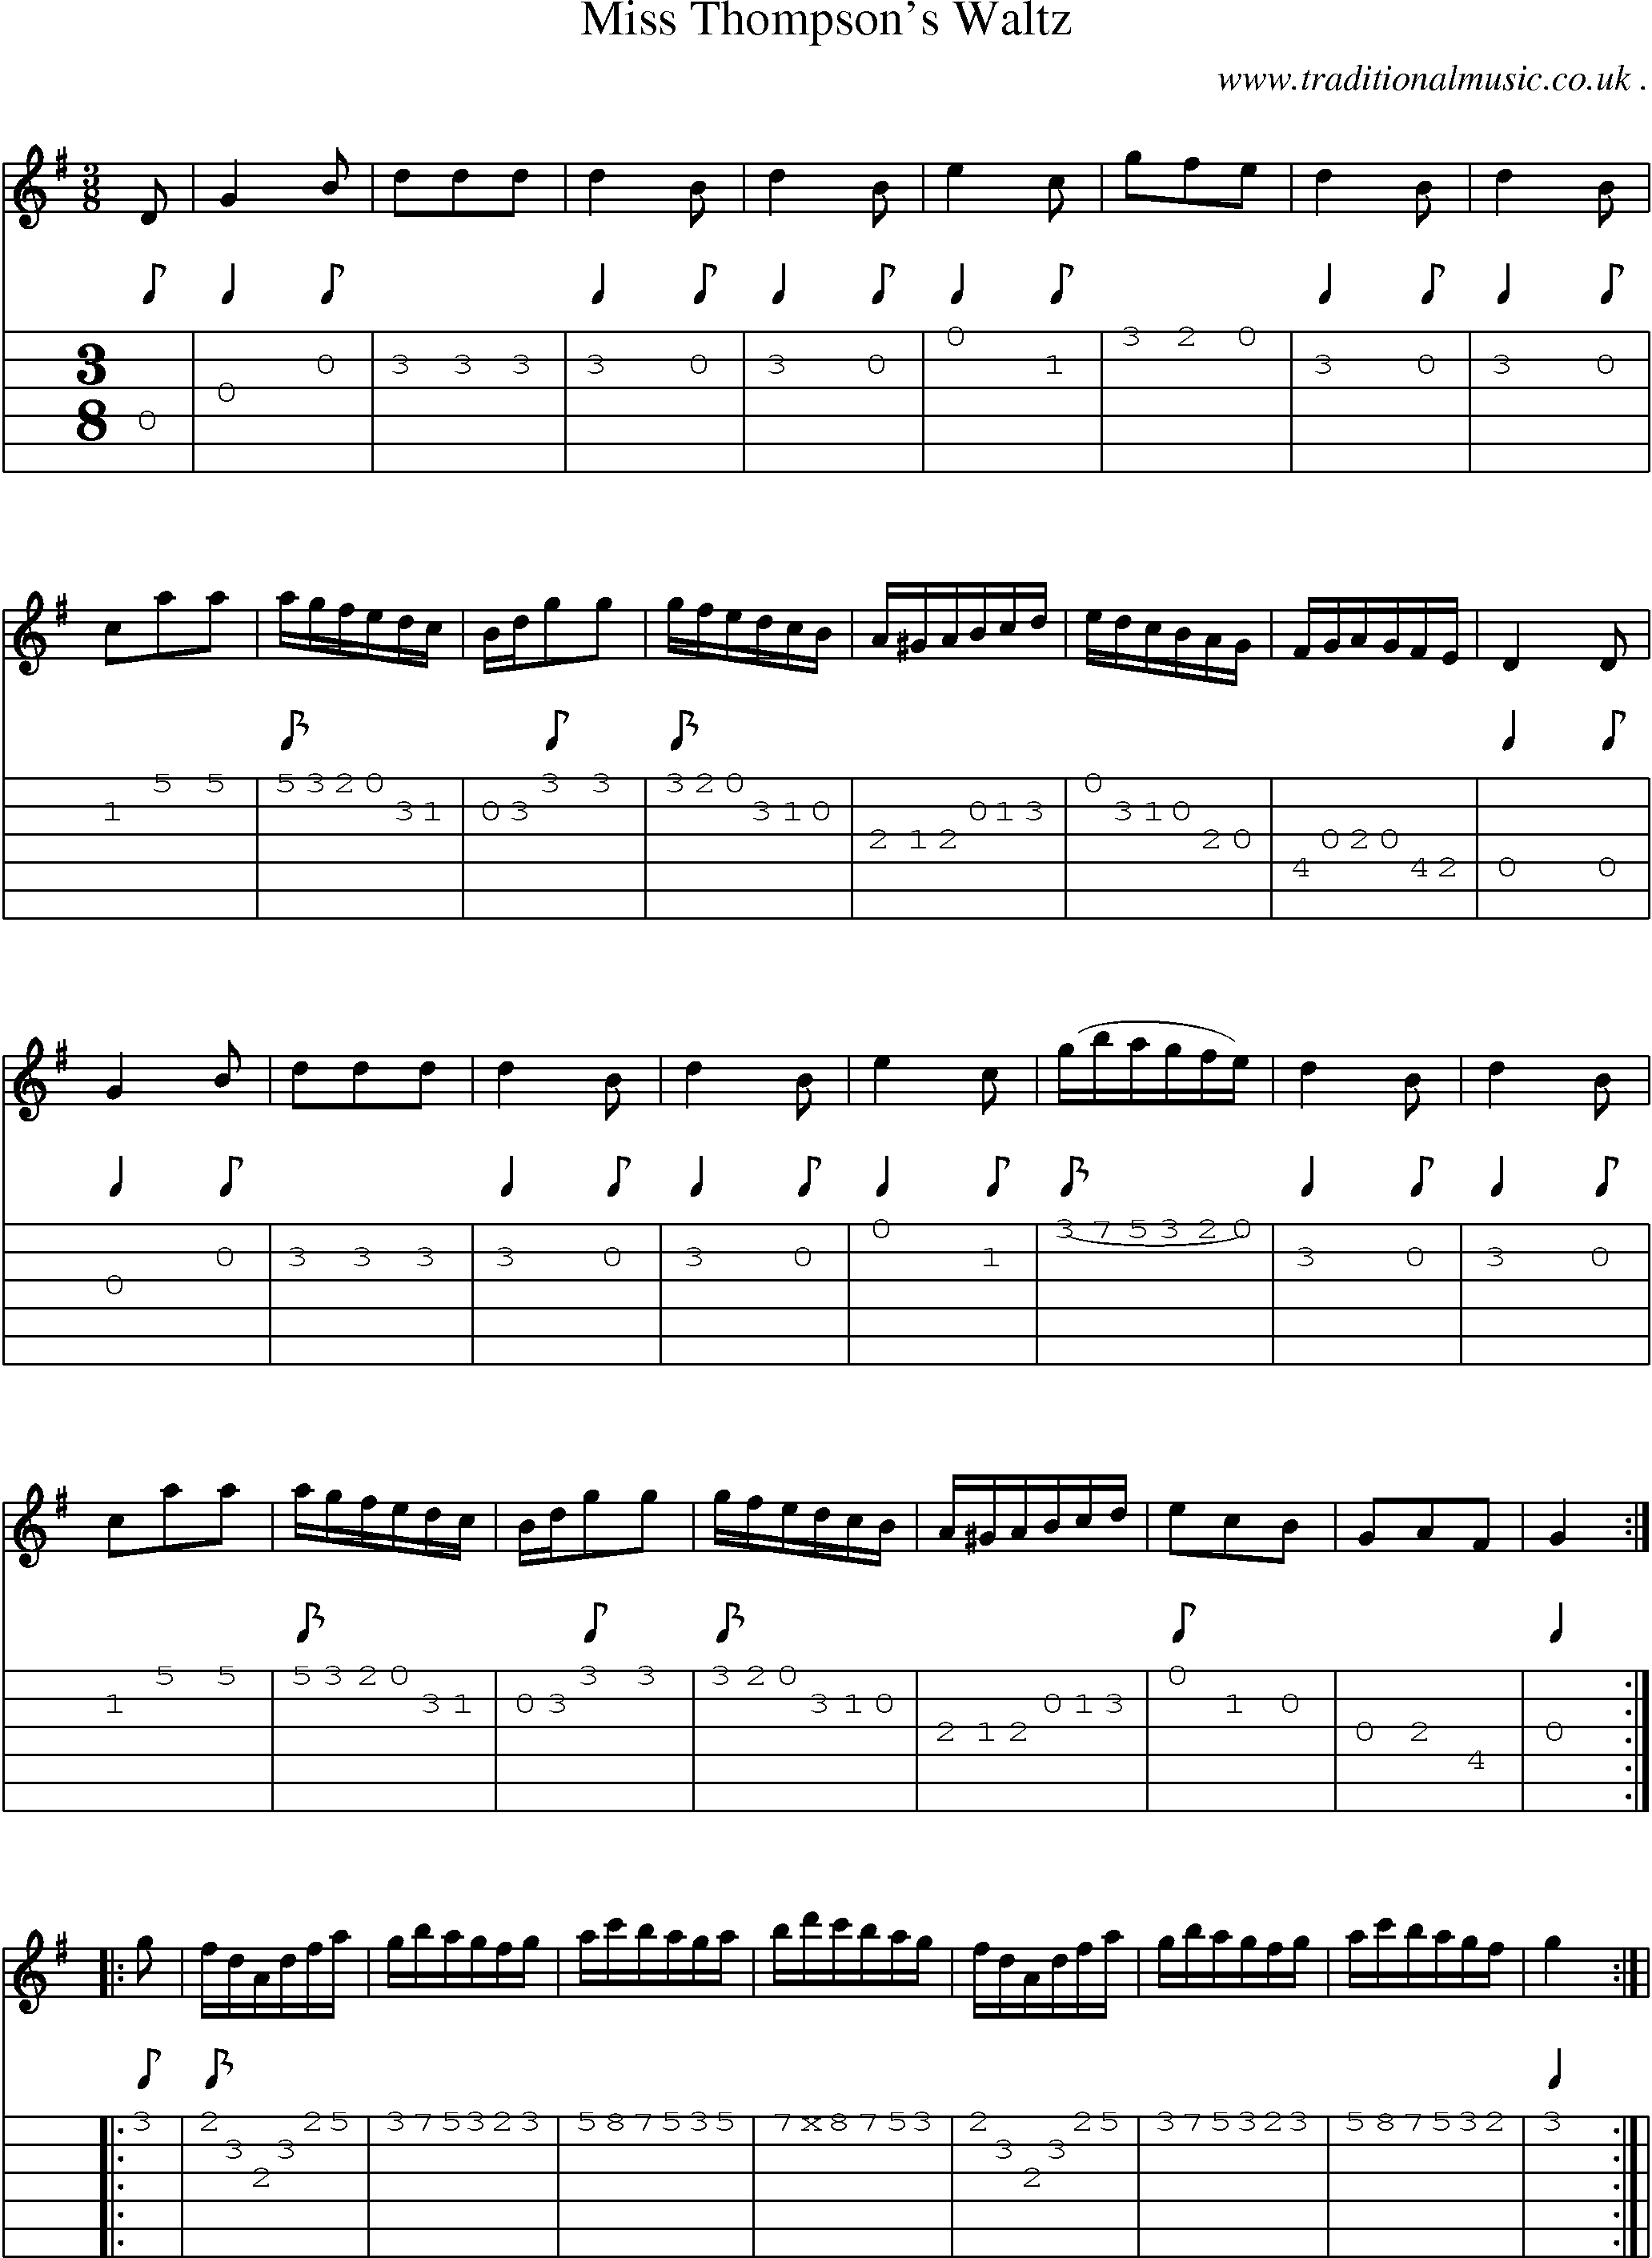 Sheet-Music and Guitar Tabs for Miss Thompsons Waltz